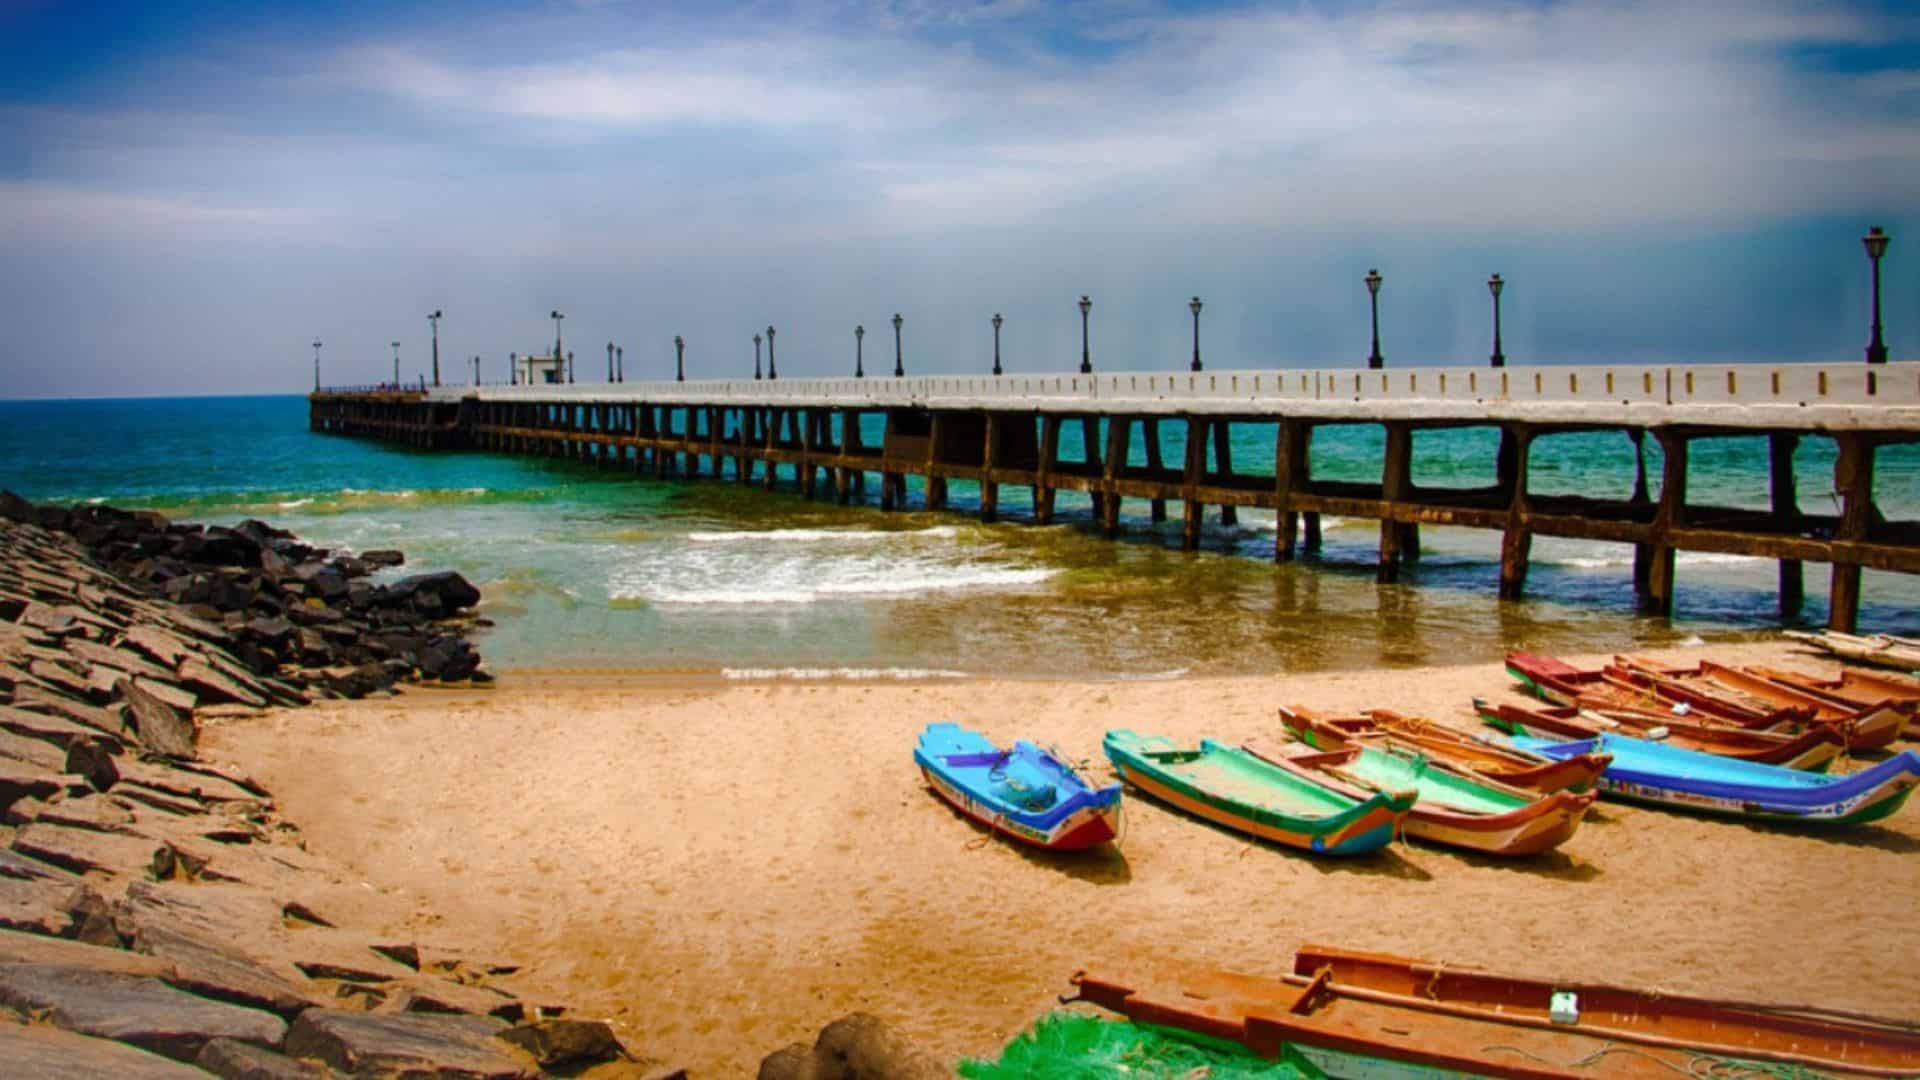 What Are The Top Places In The City Of Pondicherry That You Need To Visit?